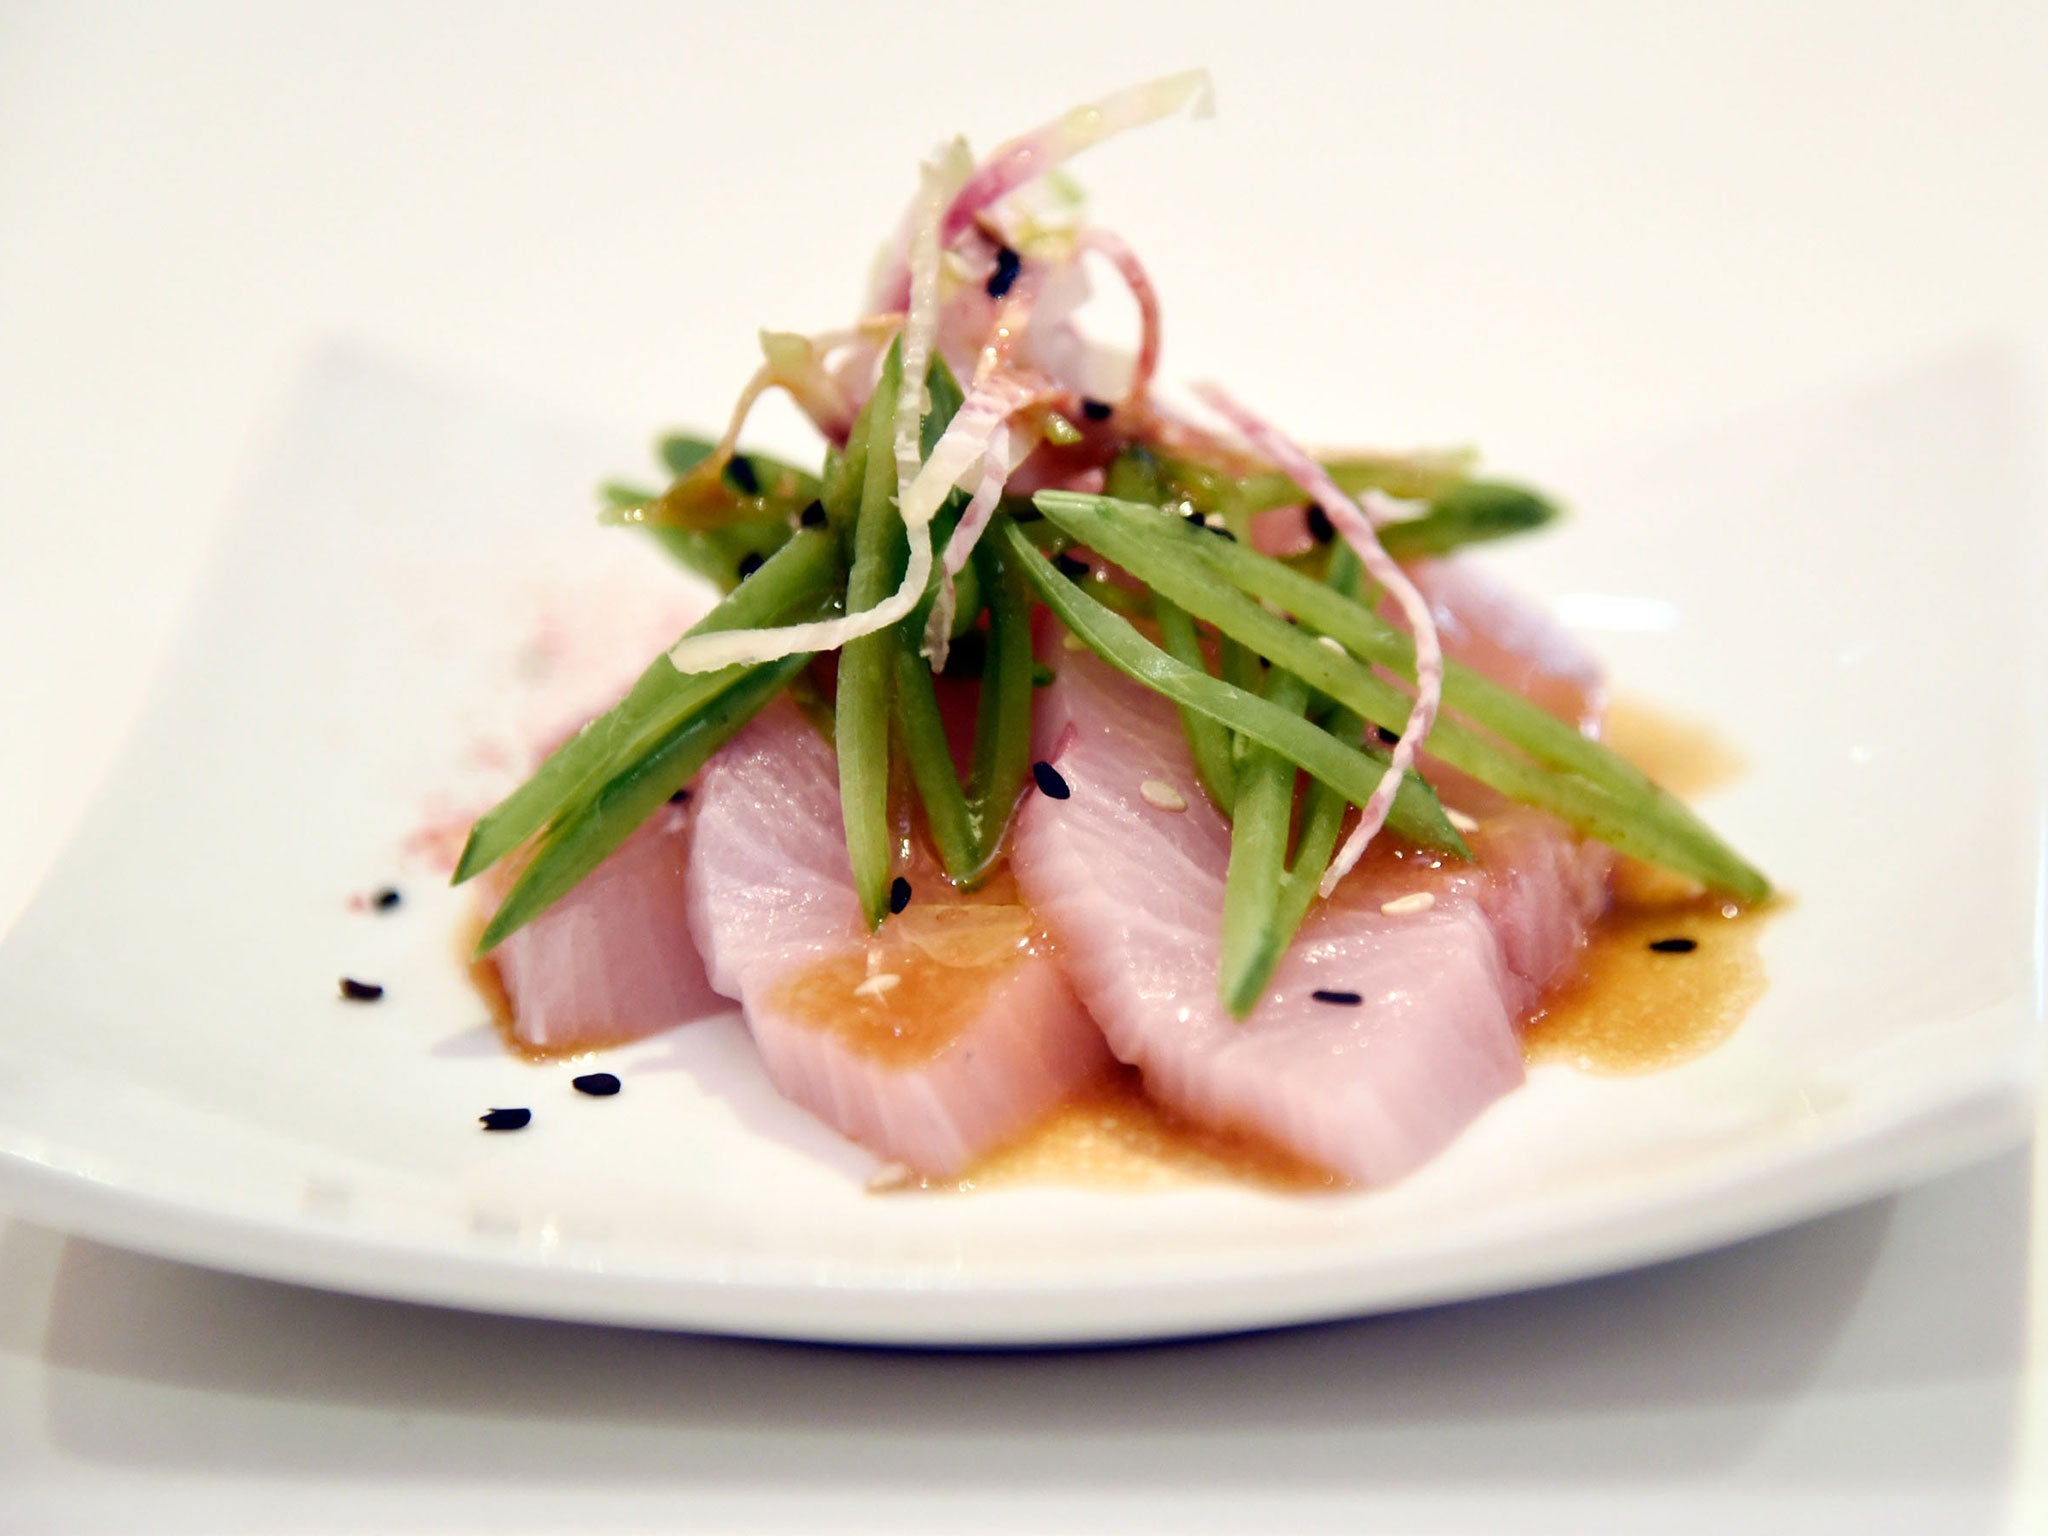 Raw fish is a popular dish in Japan